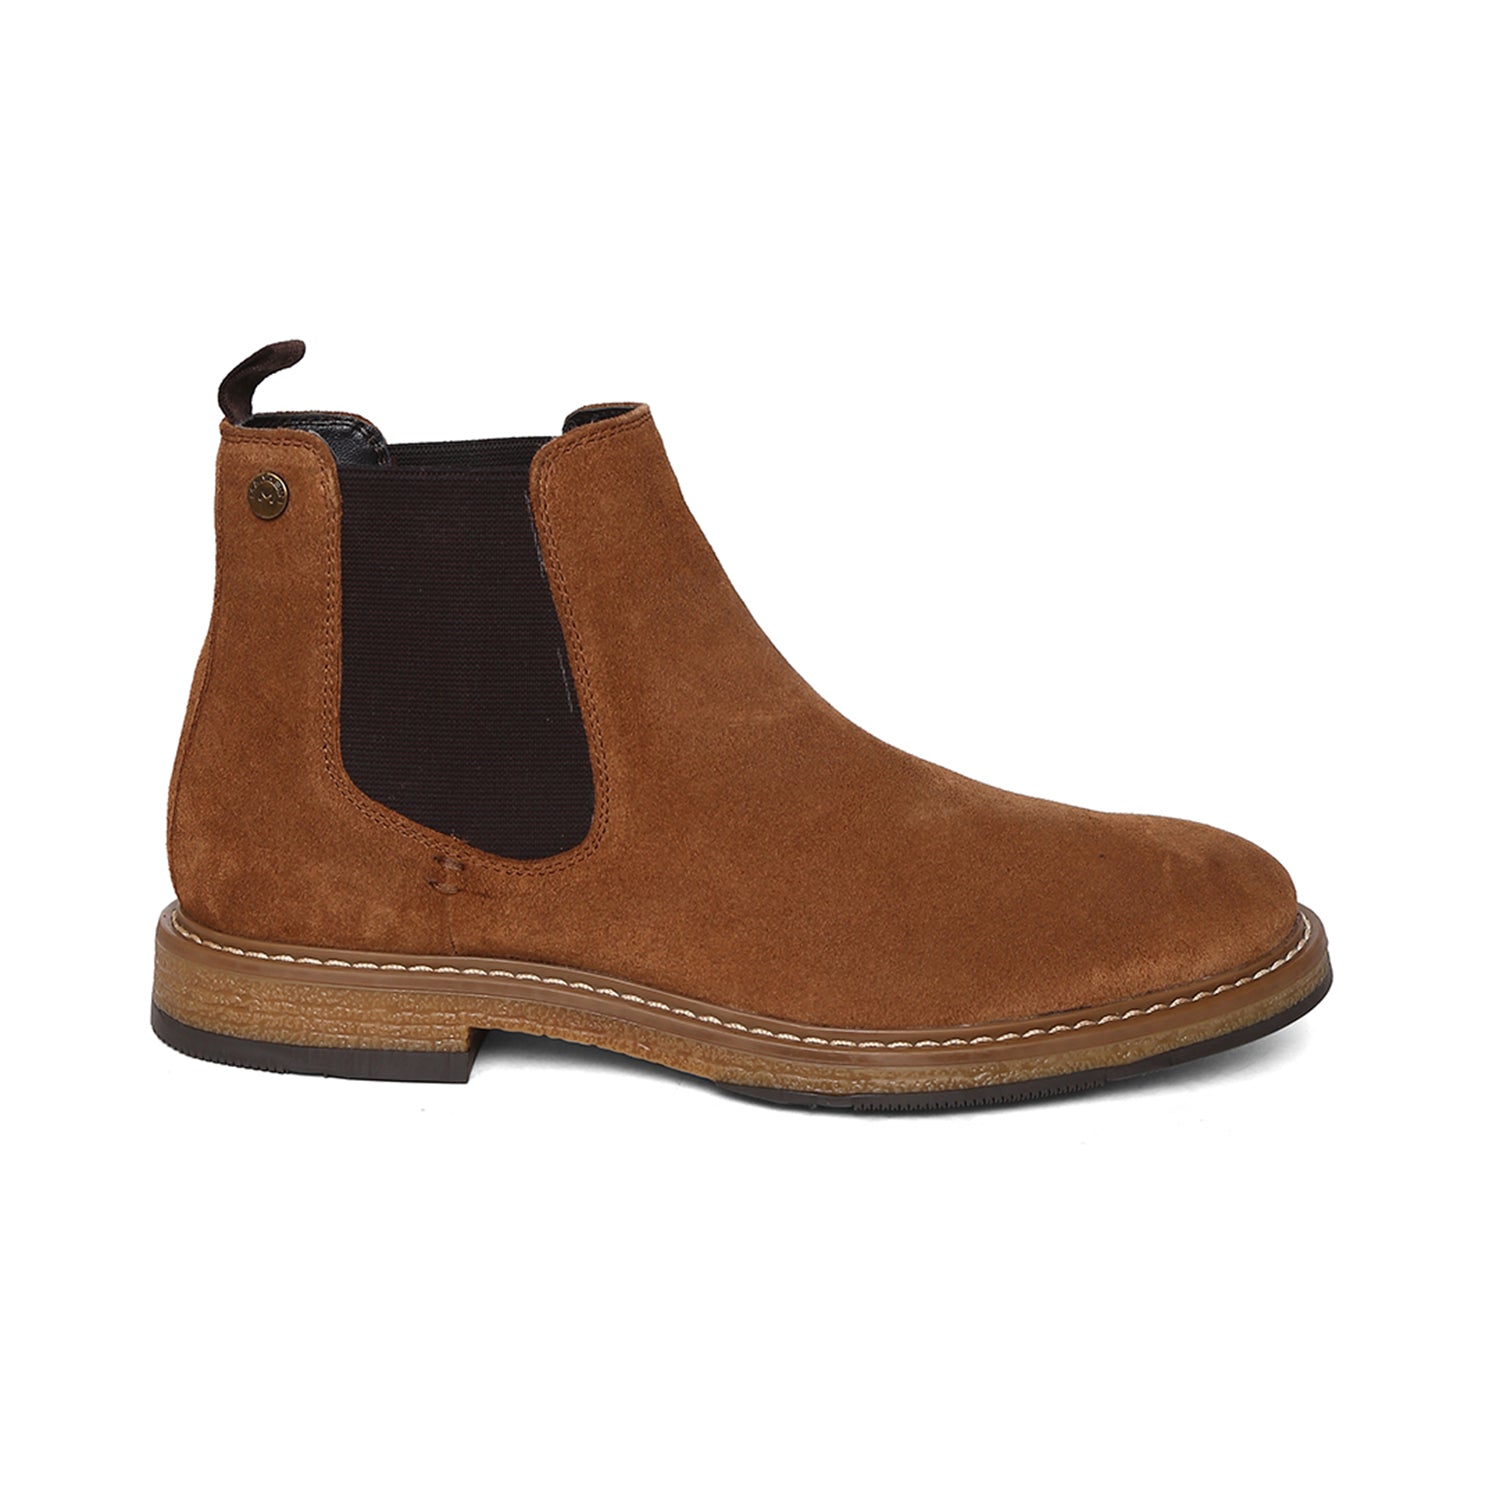 Tan Genuine Suede Leather Chelsea Elastic Boots For Men